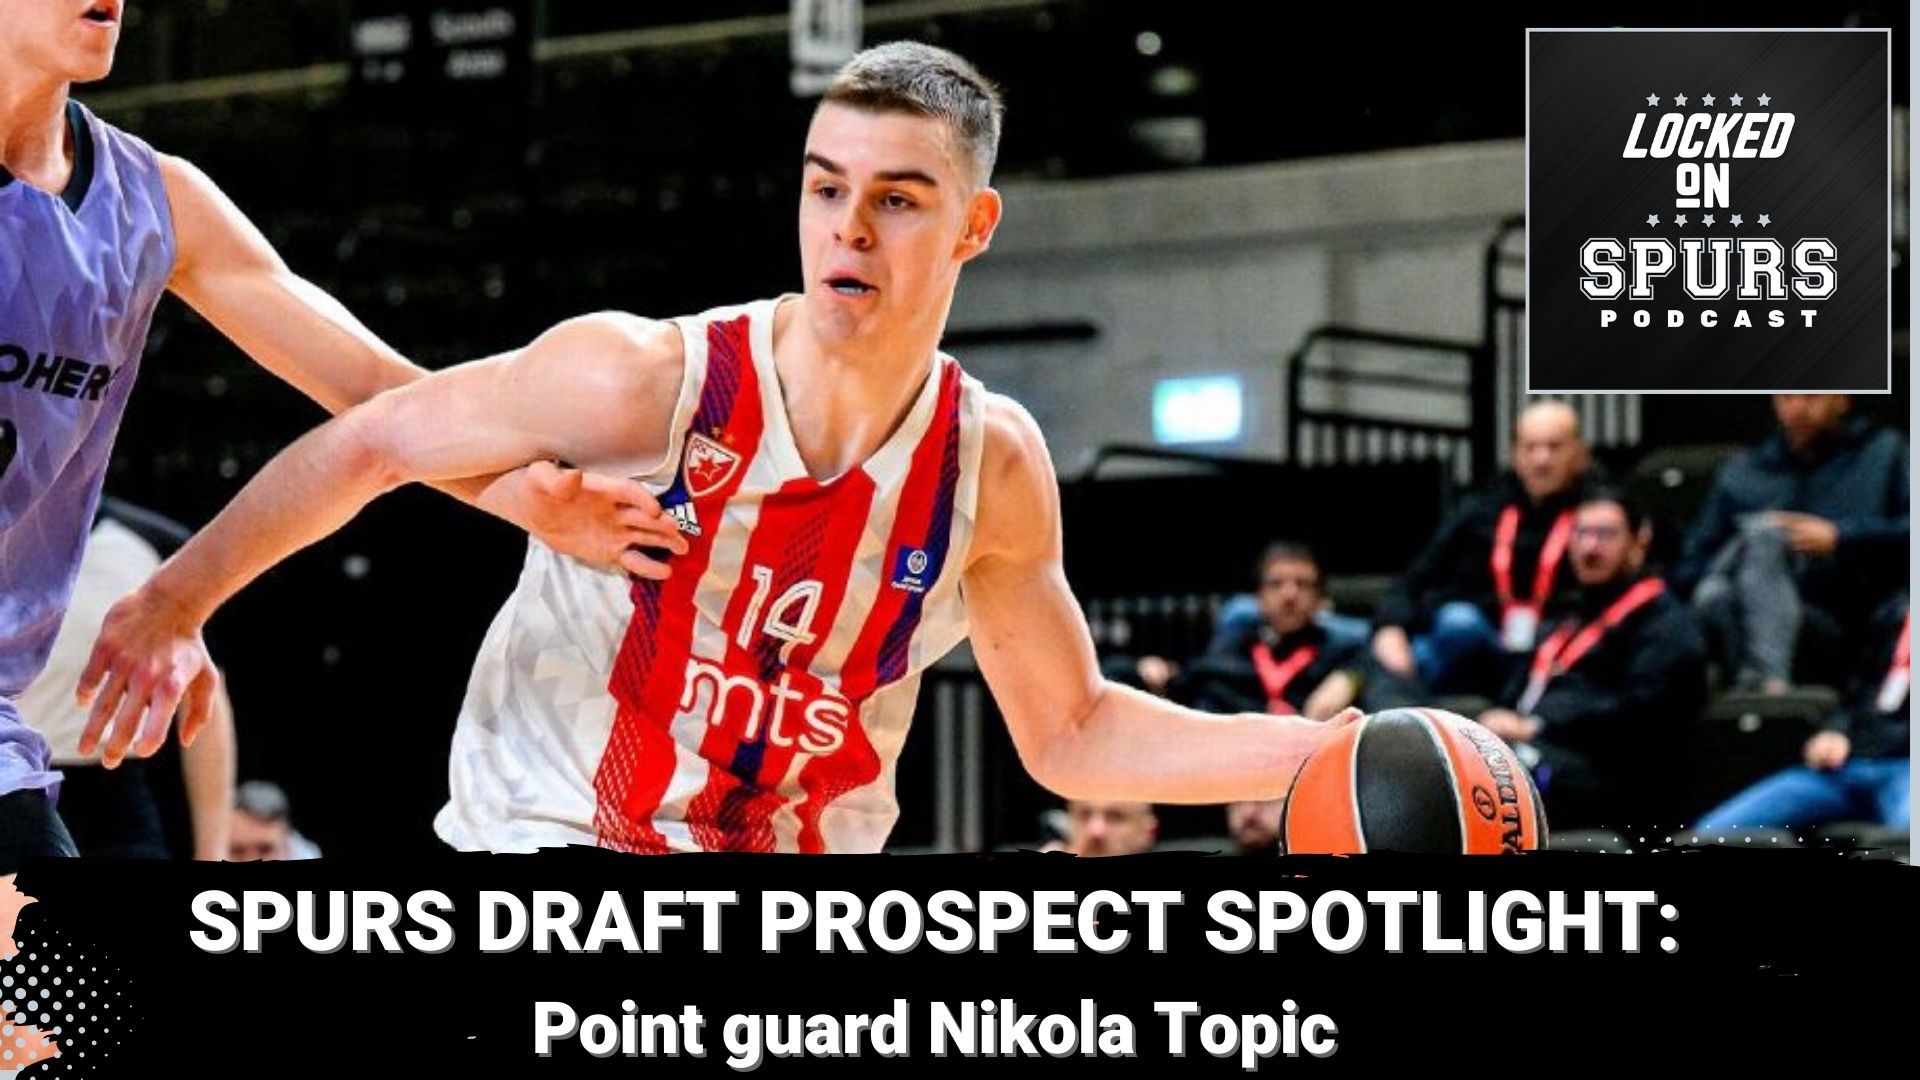 What are the possible pros and cons of the Spurs drafting the 18-year-old point guard?